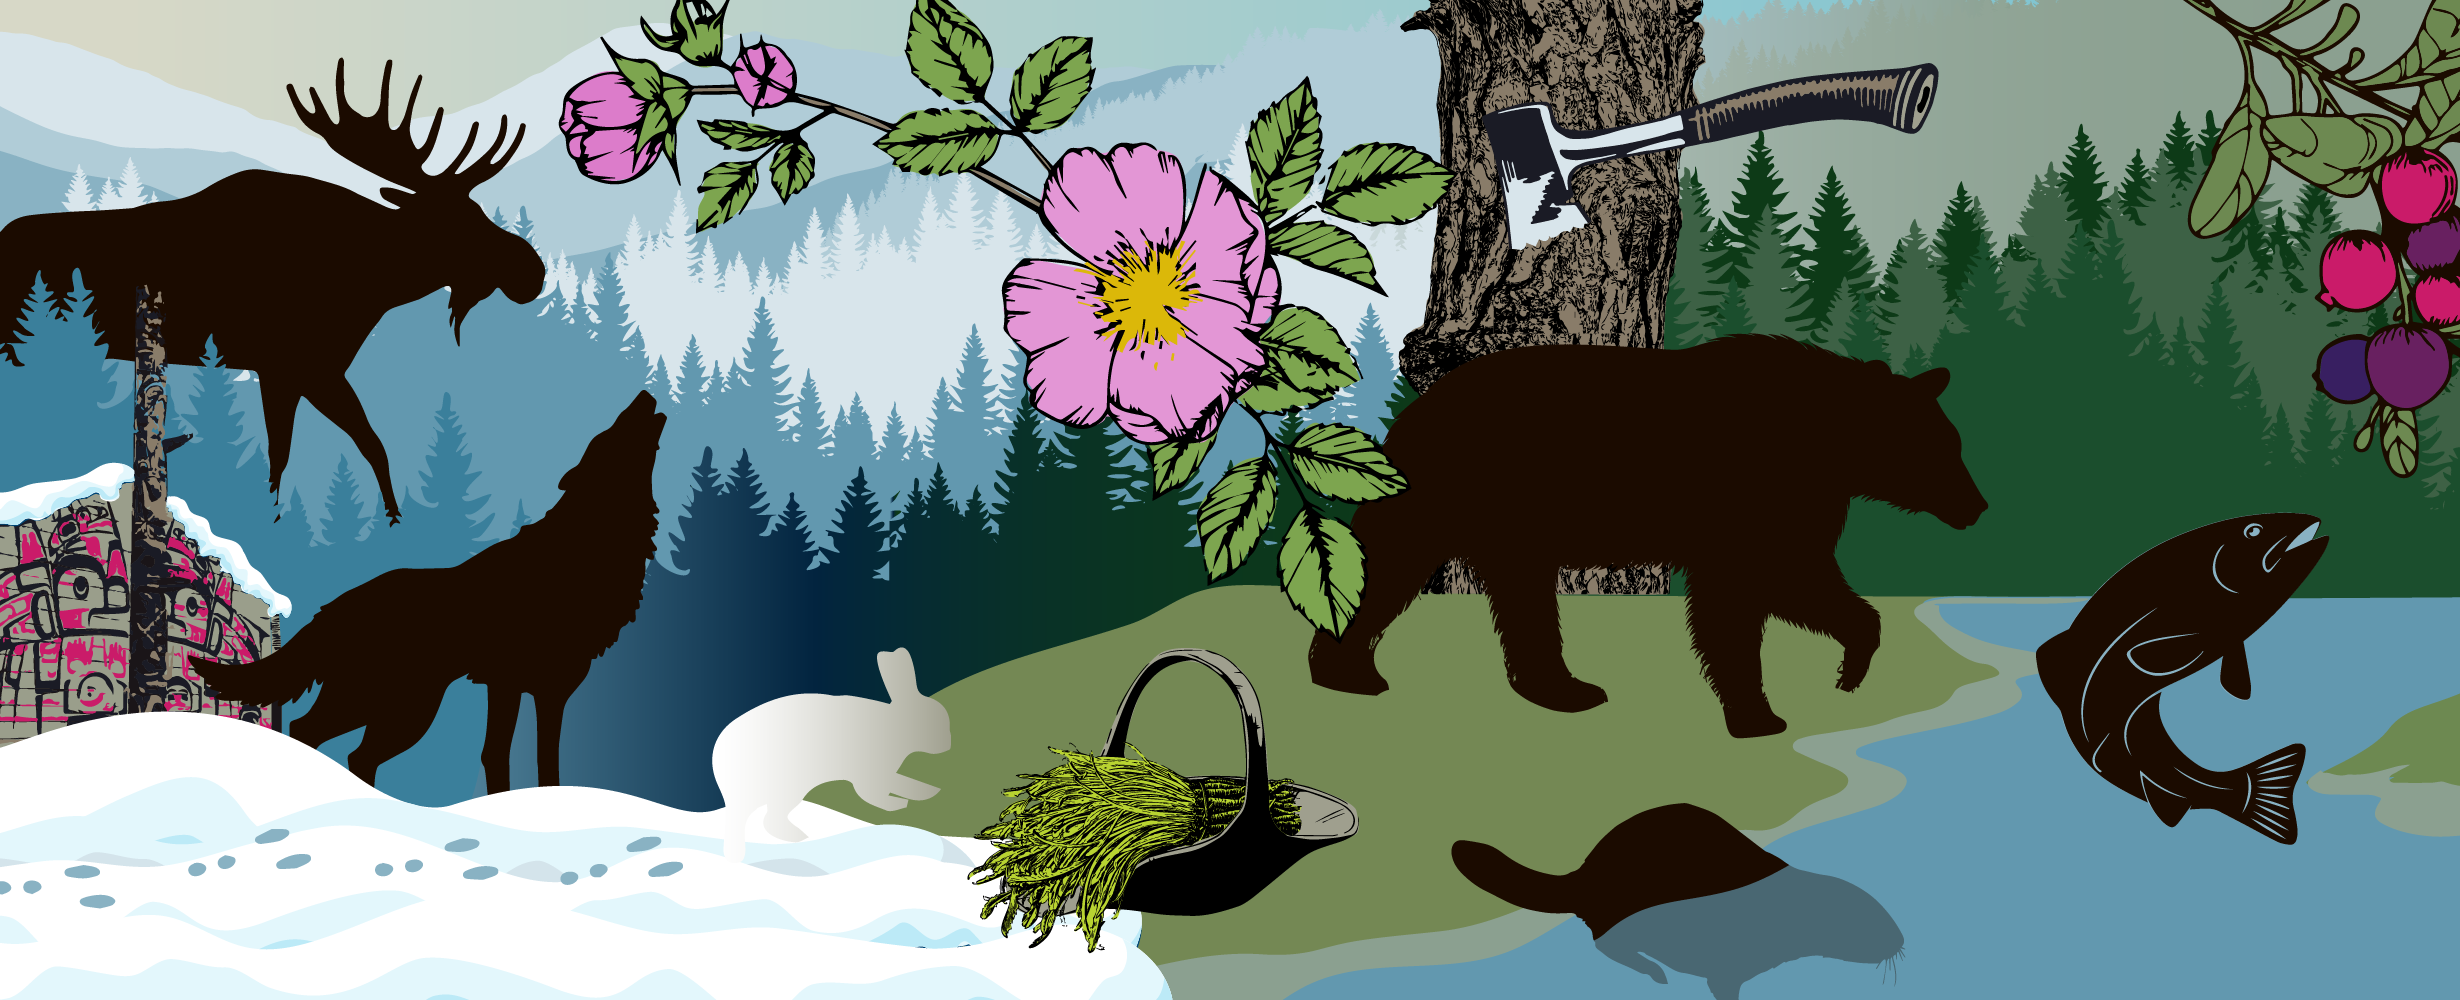 An illustration of a winter landscape, with a moose walking through trees and a wolf howling. A traditional Indigenous longhouse is featured in the background, then the image transitions to spring. A bear, beaver and fish are seen near the water